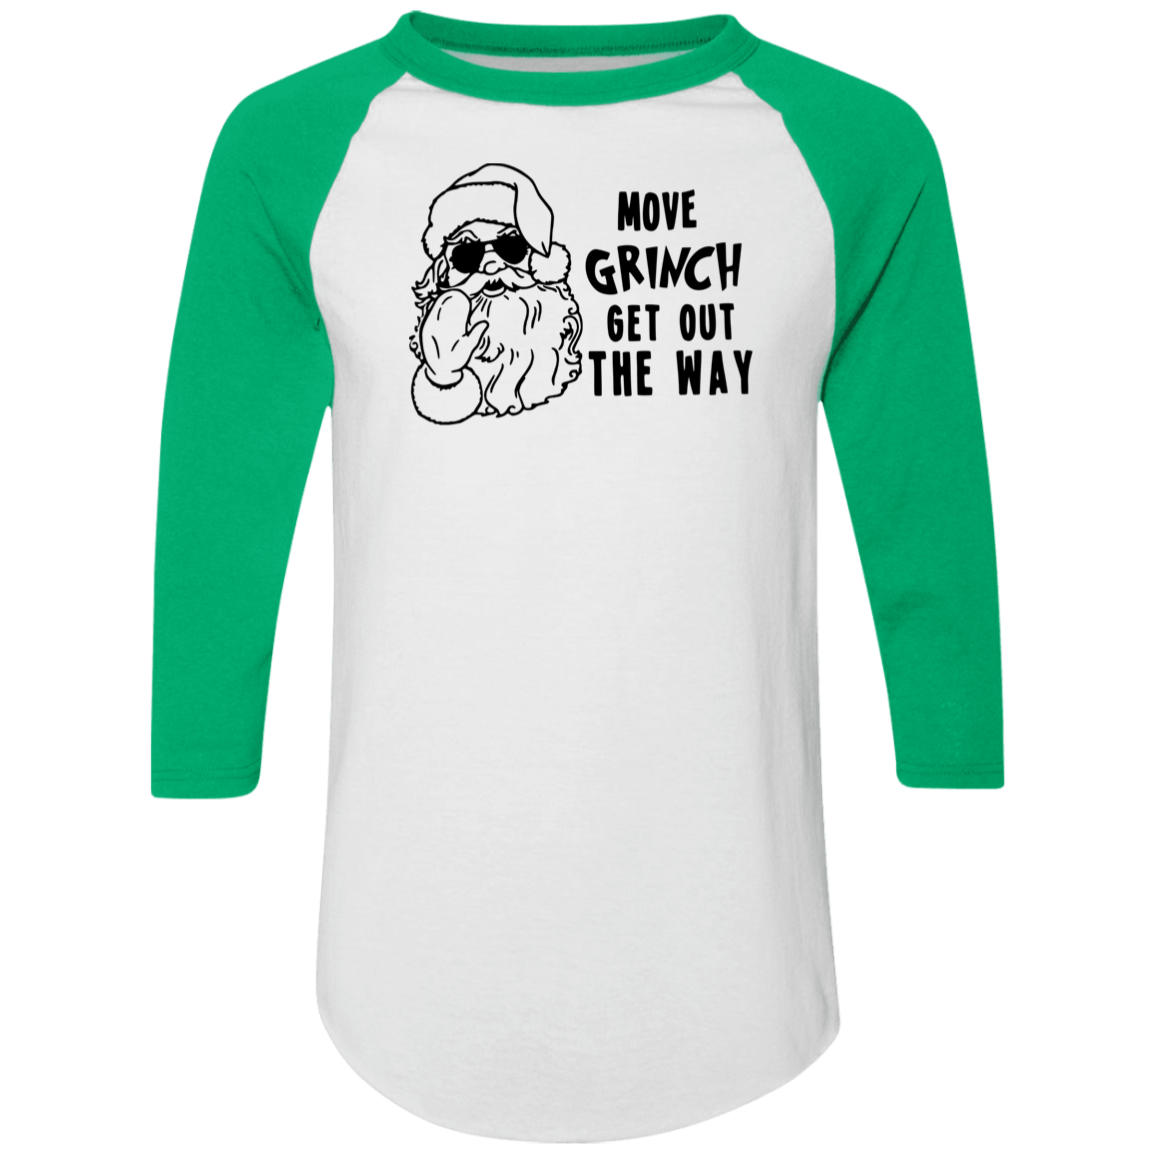 Move Grinch Get Out The Way 4420 Colorblock Raglan Jersey